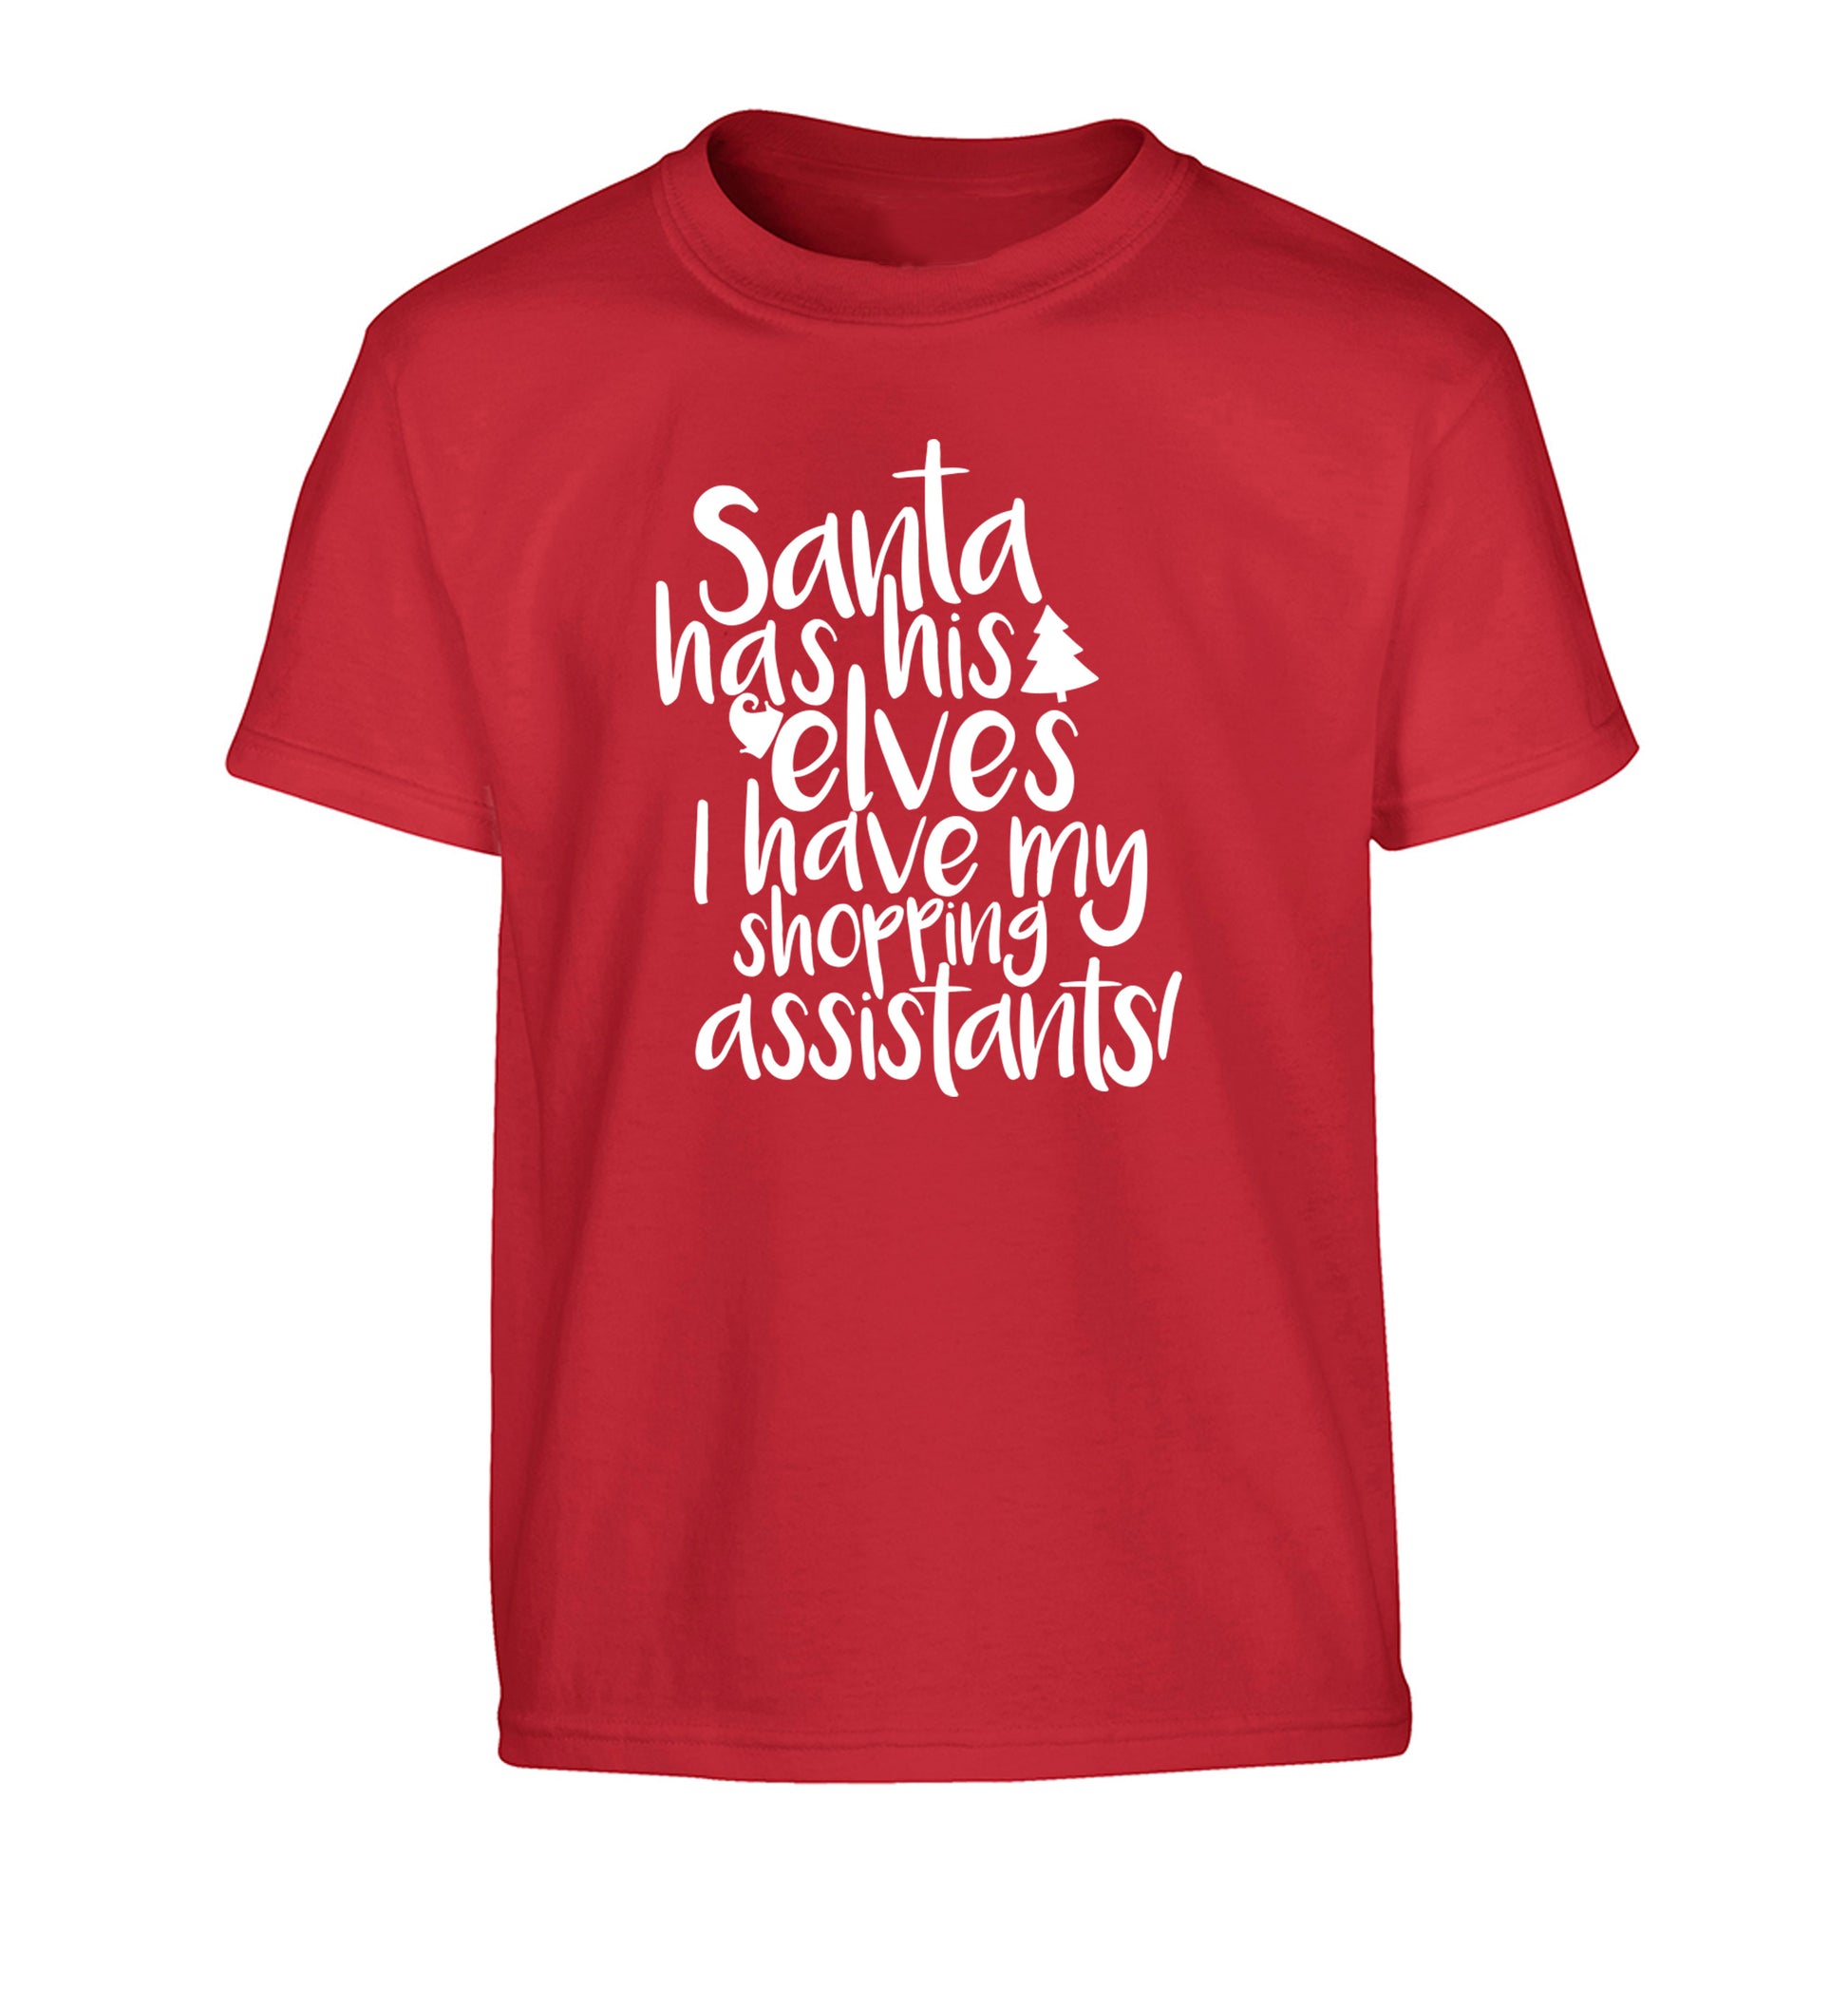 Santa has his elves I have my shopping assistant Children's red Tshirt 12-14 Years